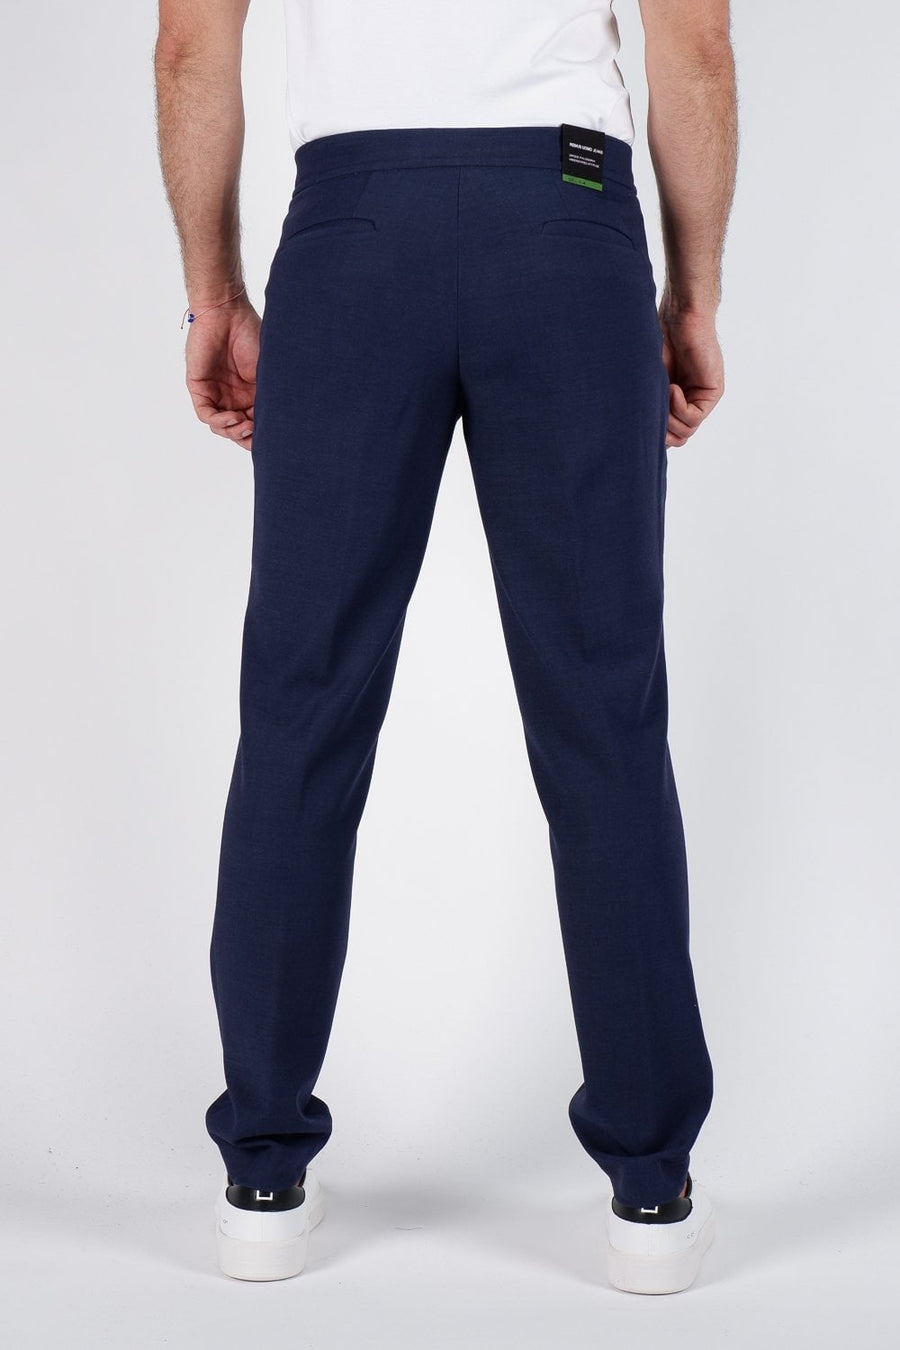 Buy the Remus Uomo Stretch Fit Cotton Trouser in Navy at Intro. Spend £50 for free UK delivery. Official stockists. We ship worldwide.